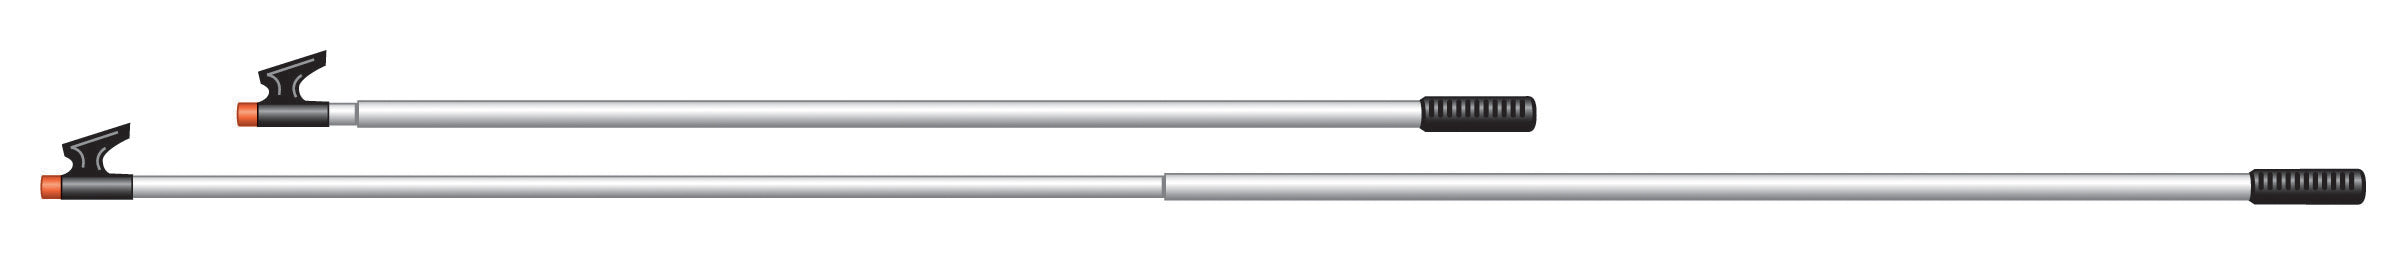 Telescoping 3-section Boat Hook, 38 in. to 8 ft. long (100 to 240 cm) —  Davis Instruments